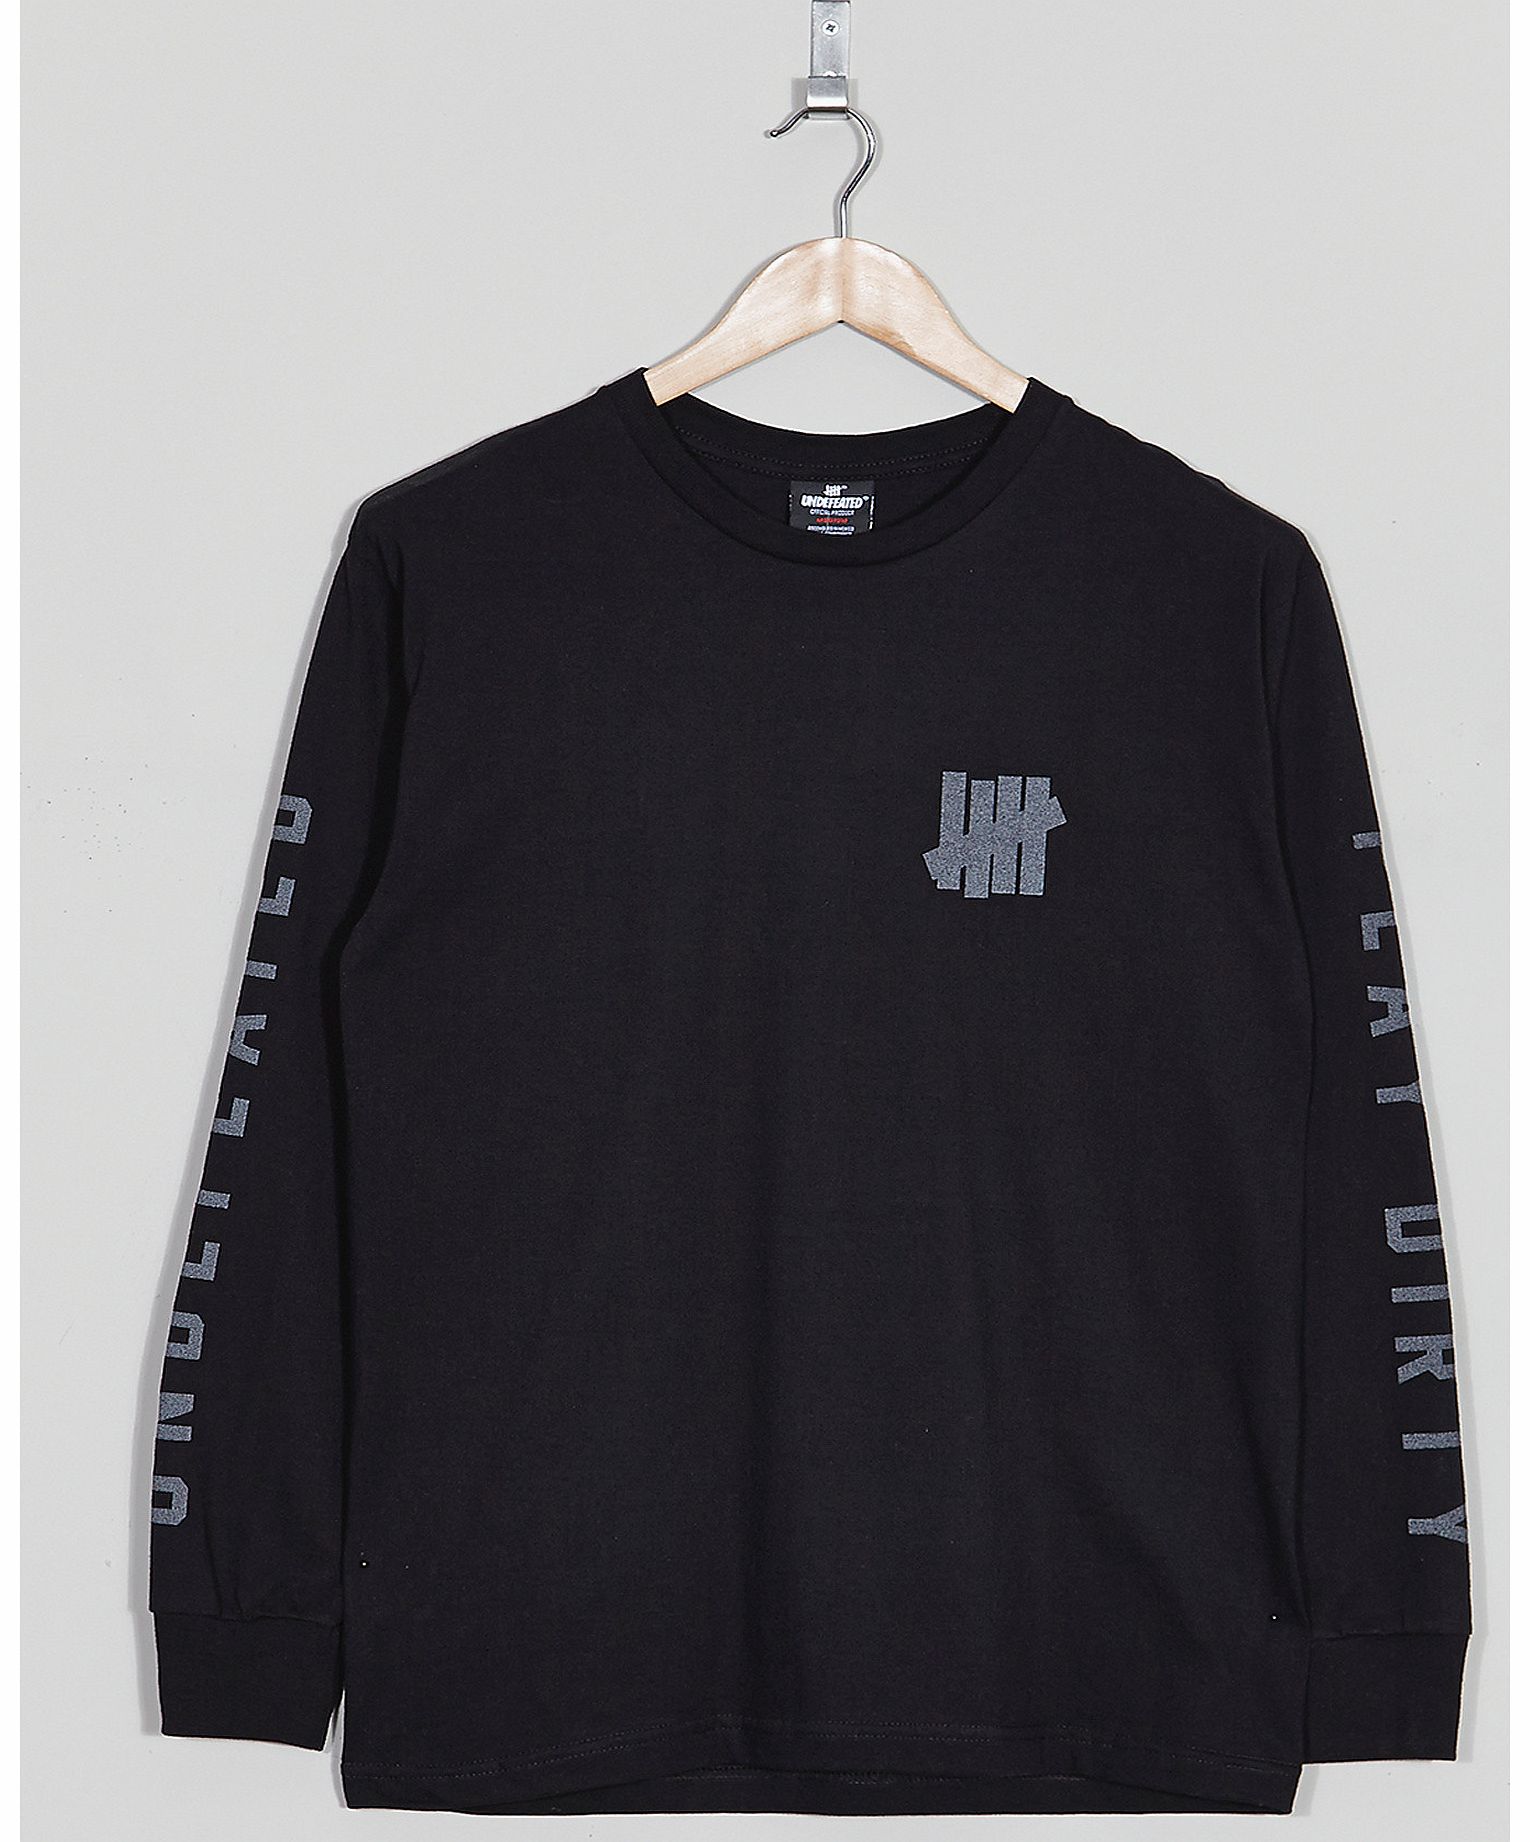 Undefeated Official Long Sleeve T-Shirt